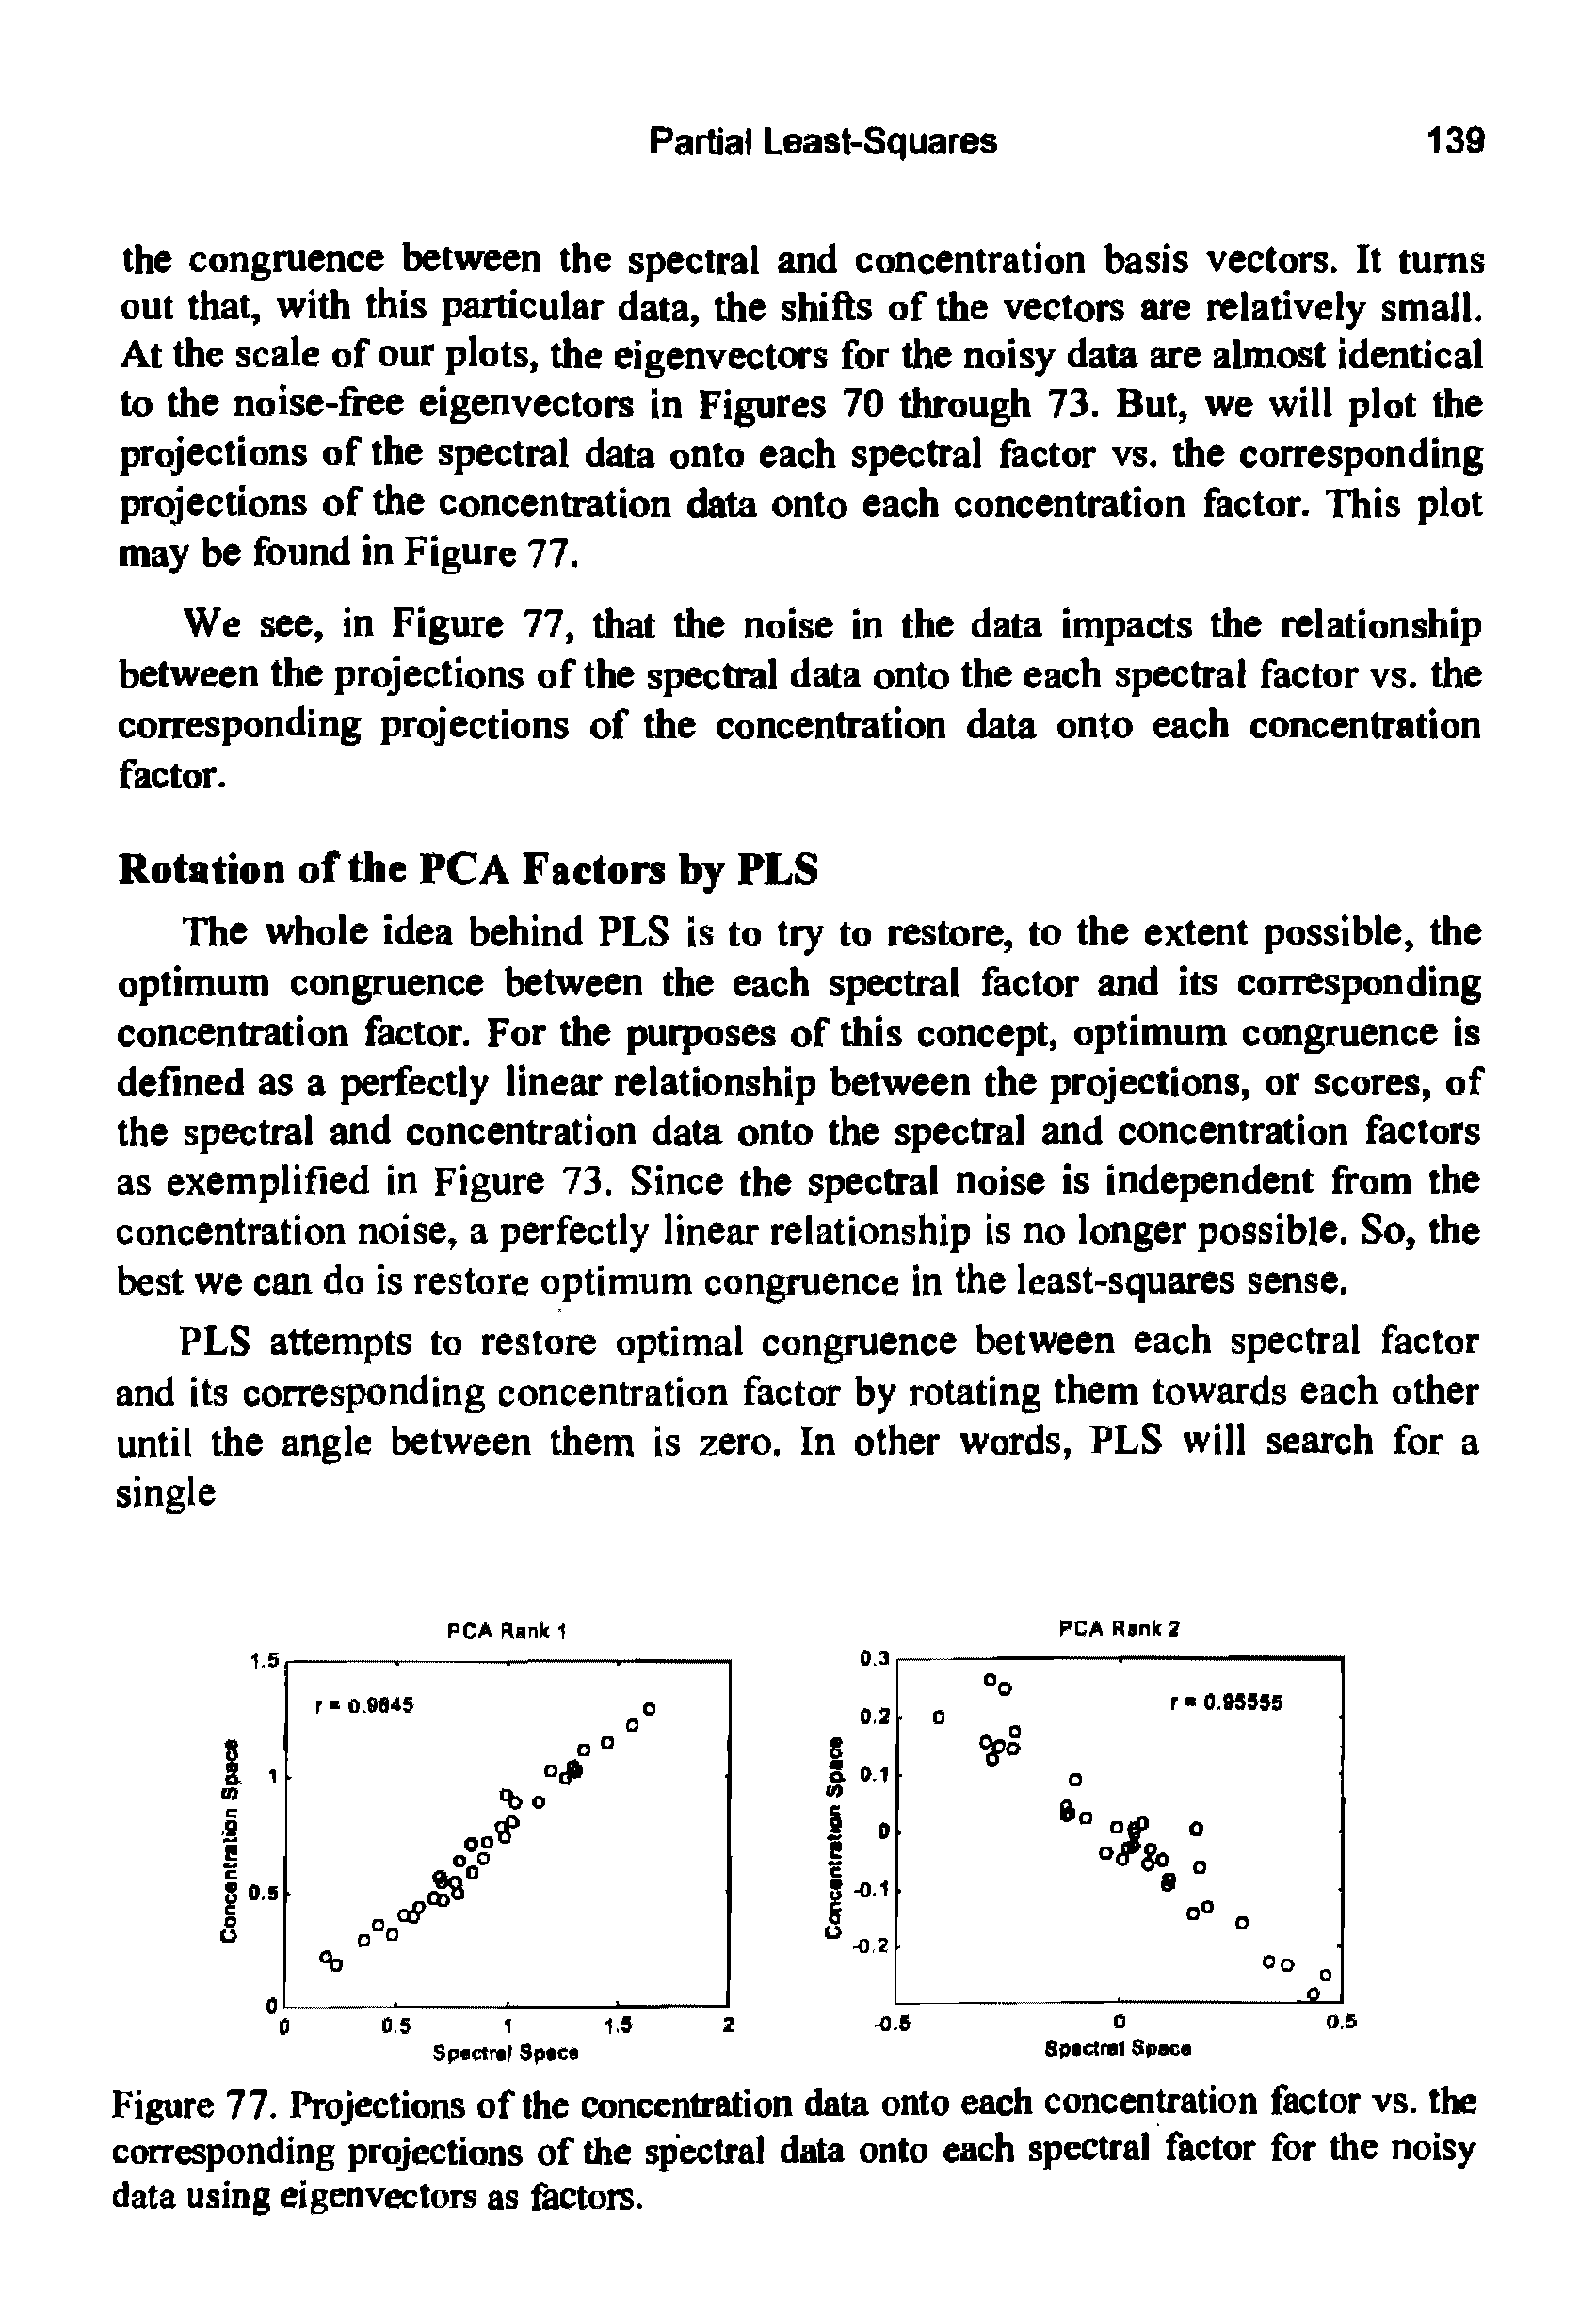 Figure 77. Projections of the concentration data onto each concentration factor vs. the corresponding projections of the spectral data onto each spectral factor for the noisy data using eigenvectors as factors.